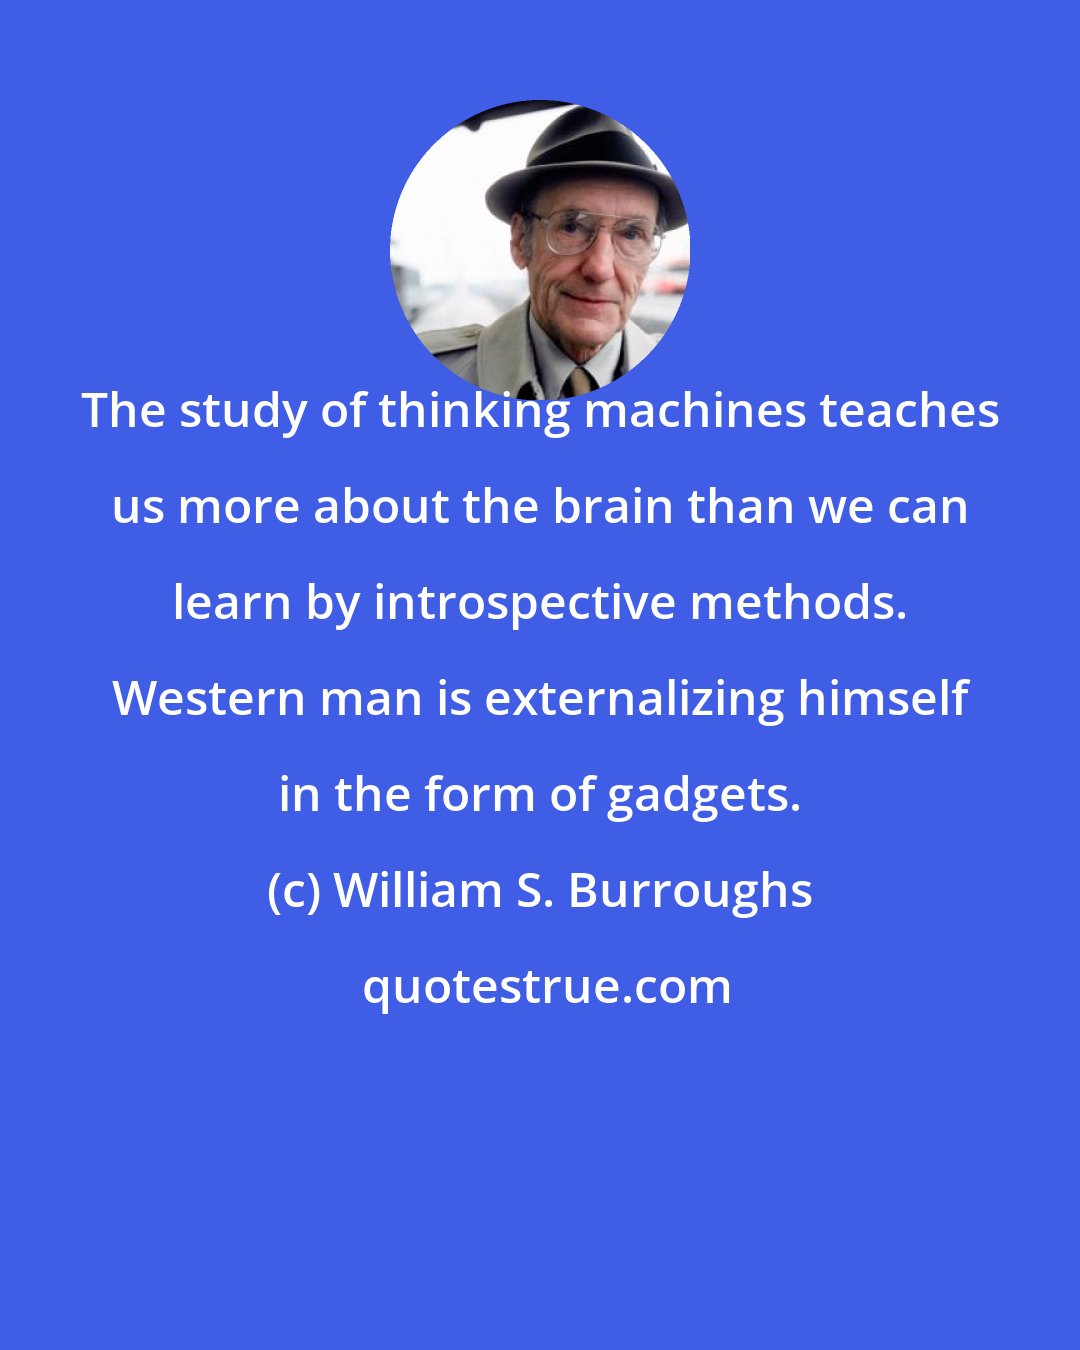 William S. Burroughs: The study of thinking machines teaches us more about the brain than we can learn by introspective methods. Western man is externalizing himself in the form of gadgets.